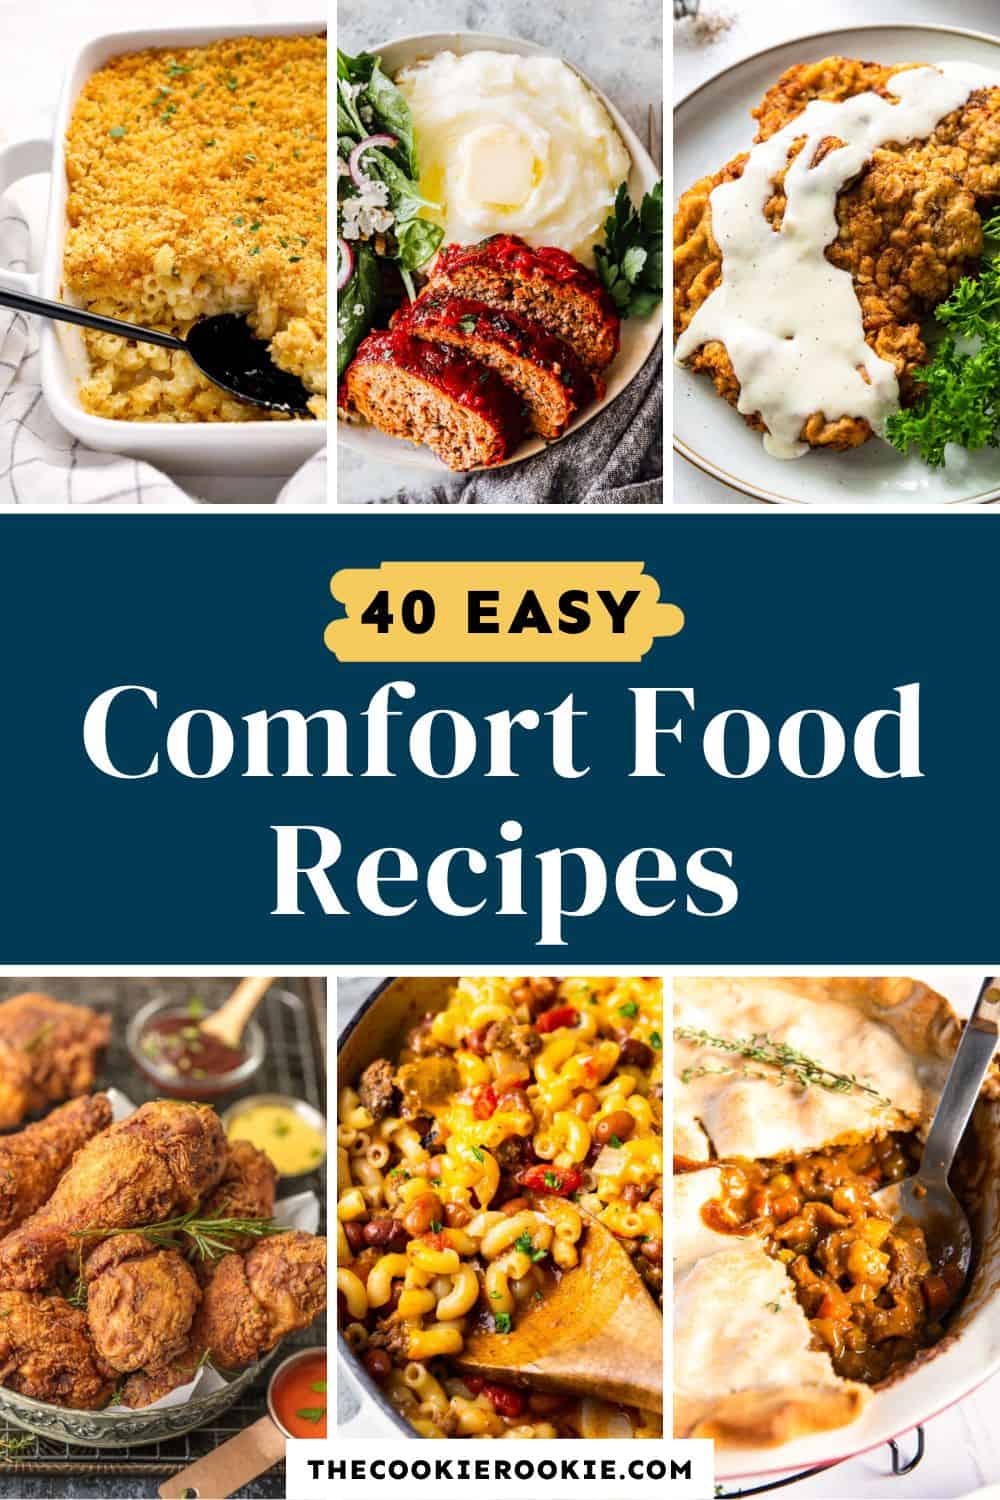 40 easy comfort food recipes and dinner ideas